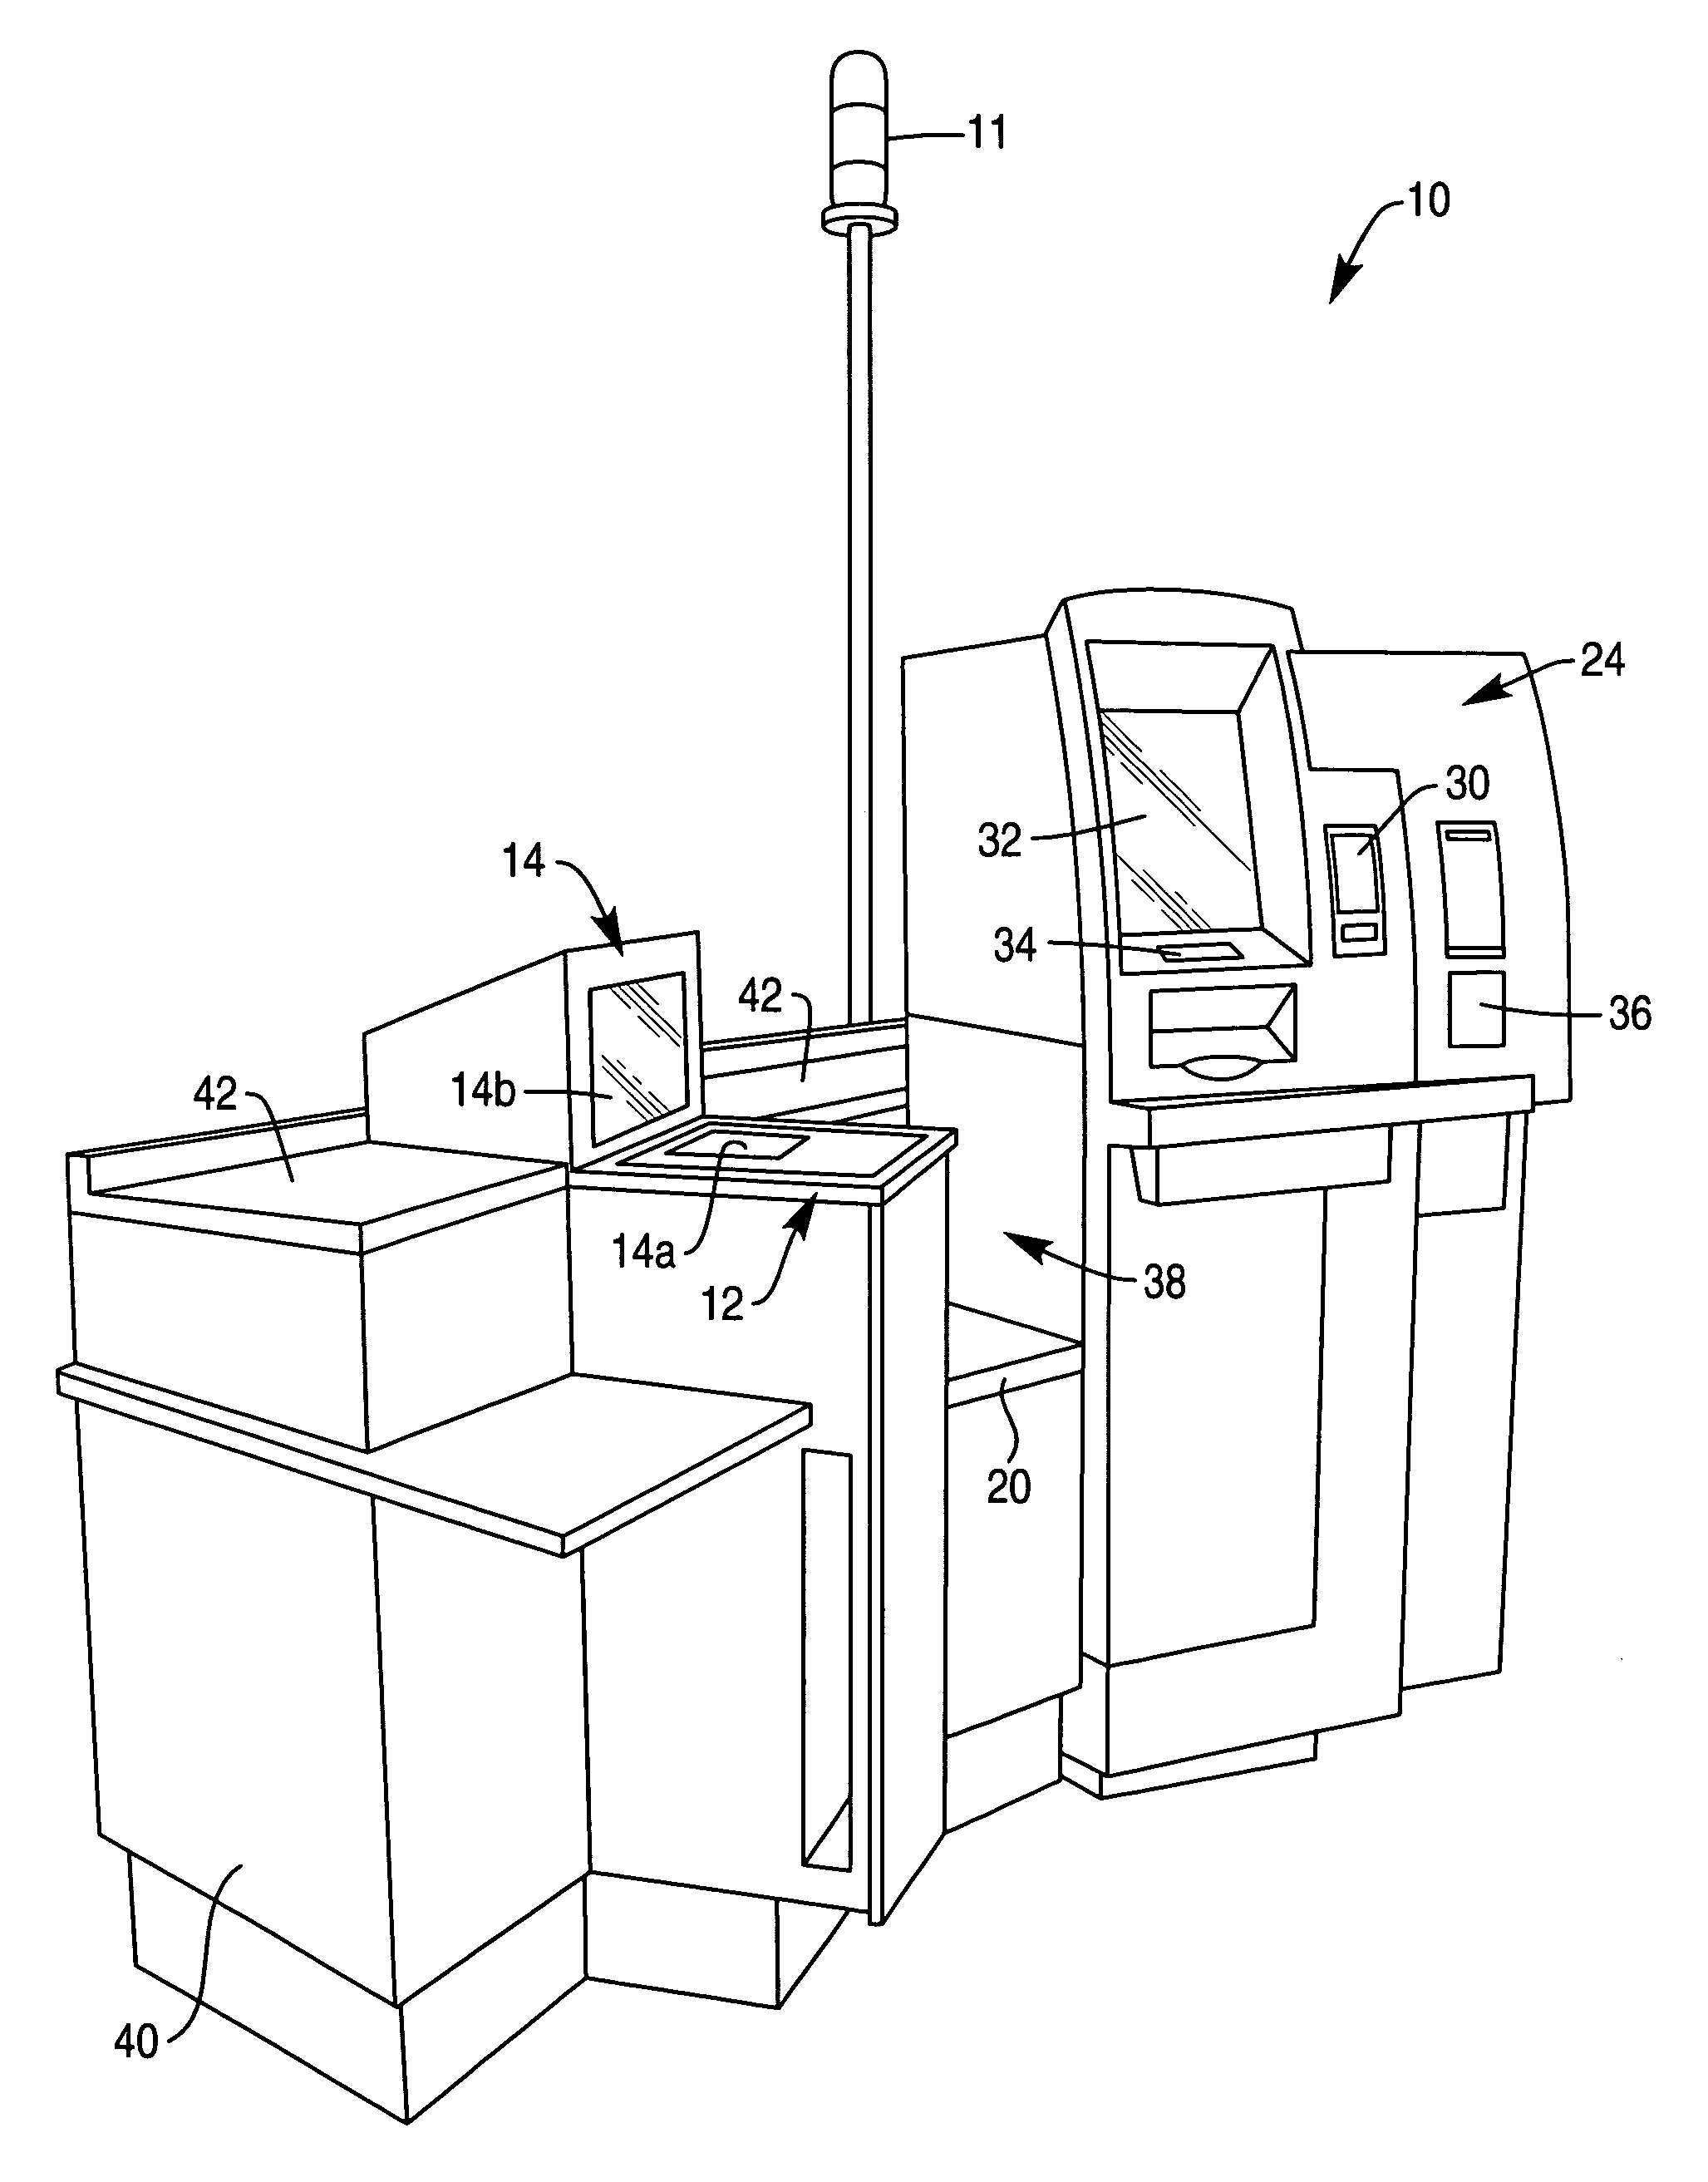 Method and apparatus for determining if a user walks away from a self-service checkout terminal during operation thereof